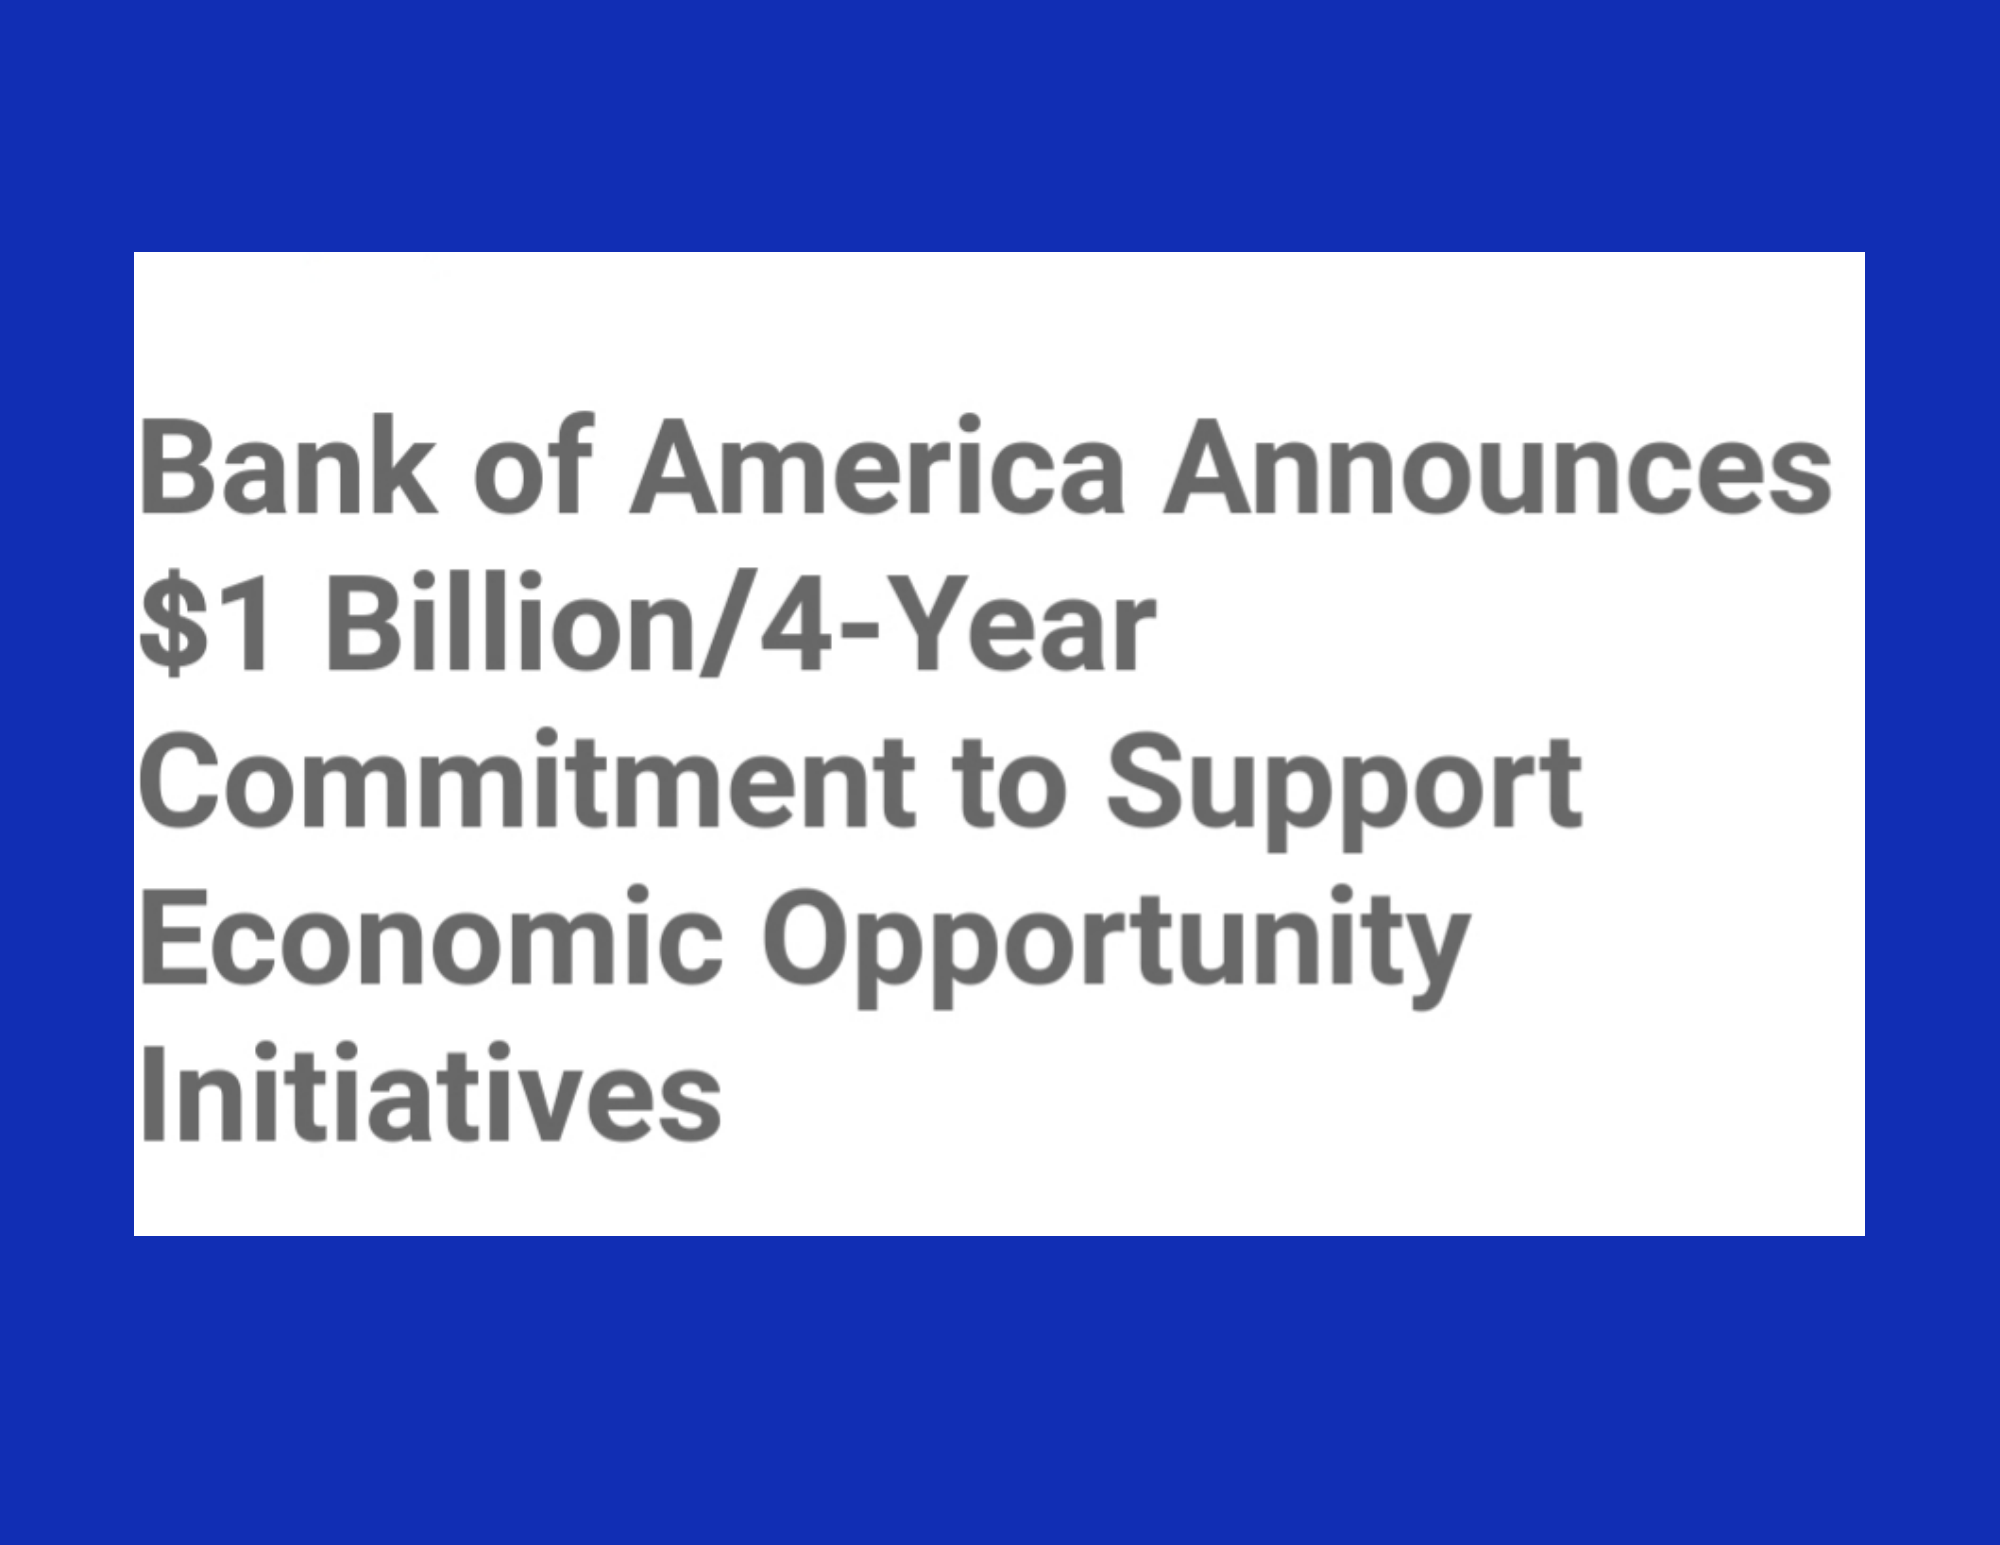 Bank of America Announces 1 Billion/4Year Commitment to Support